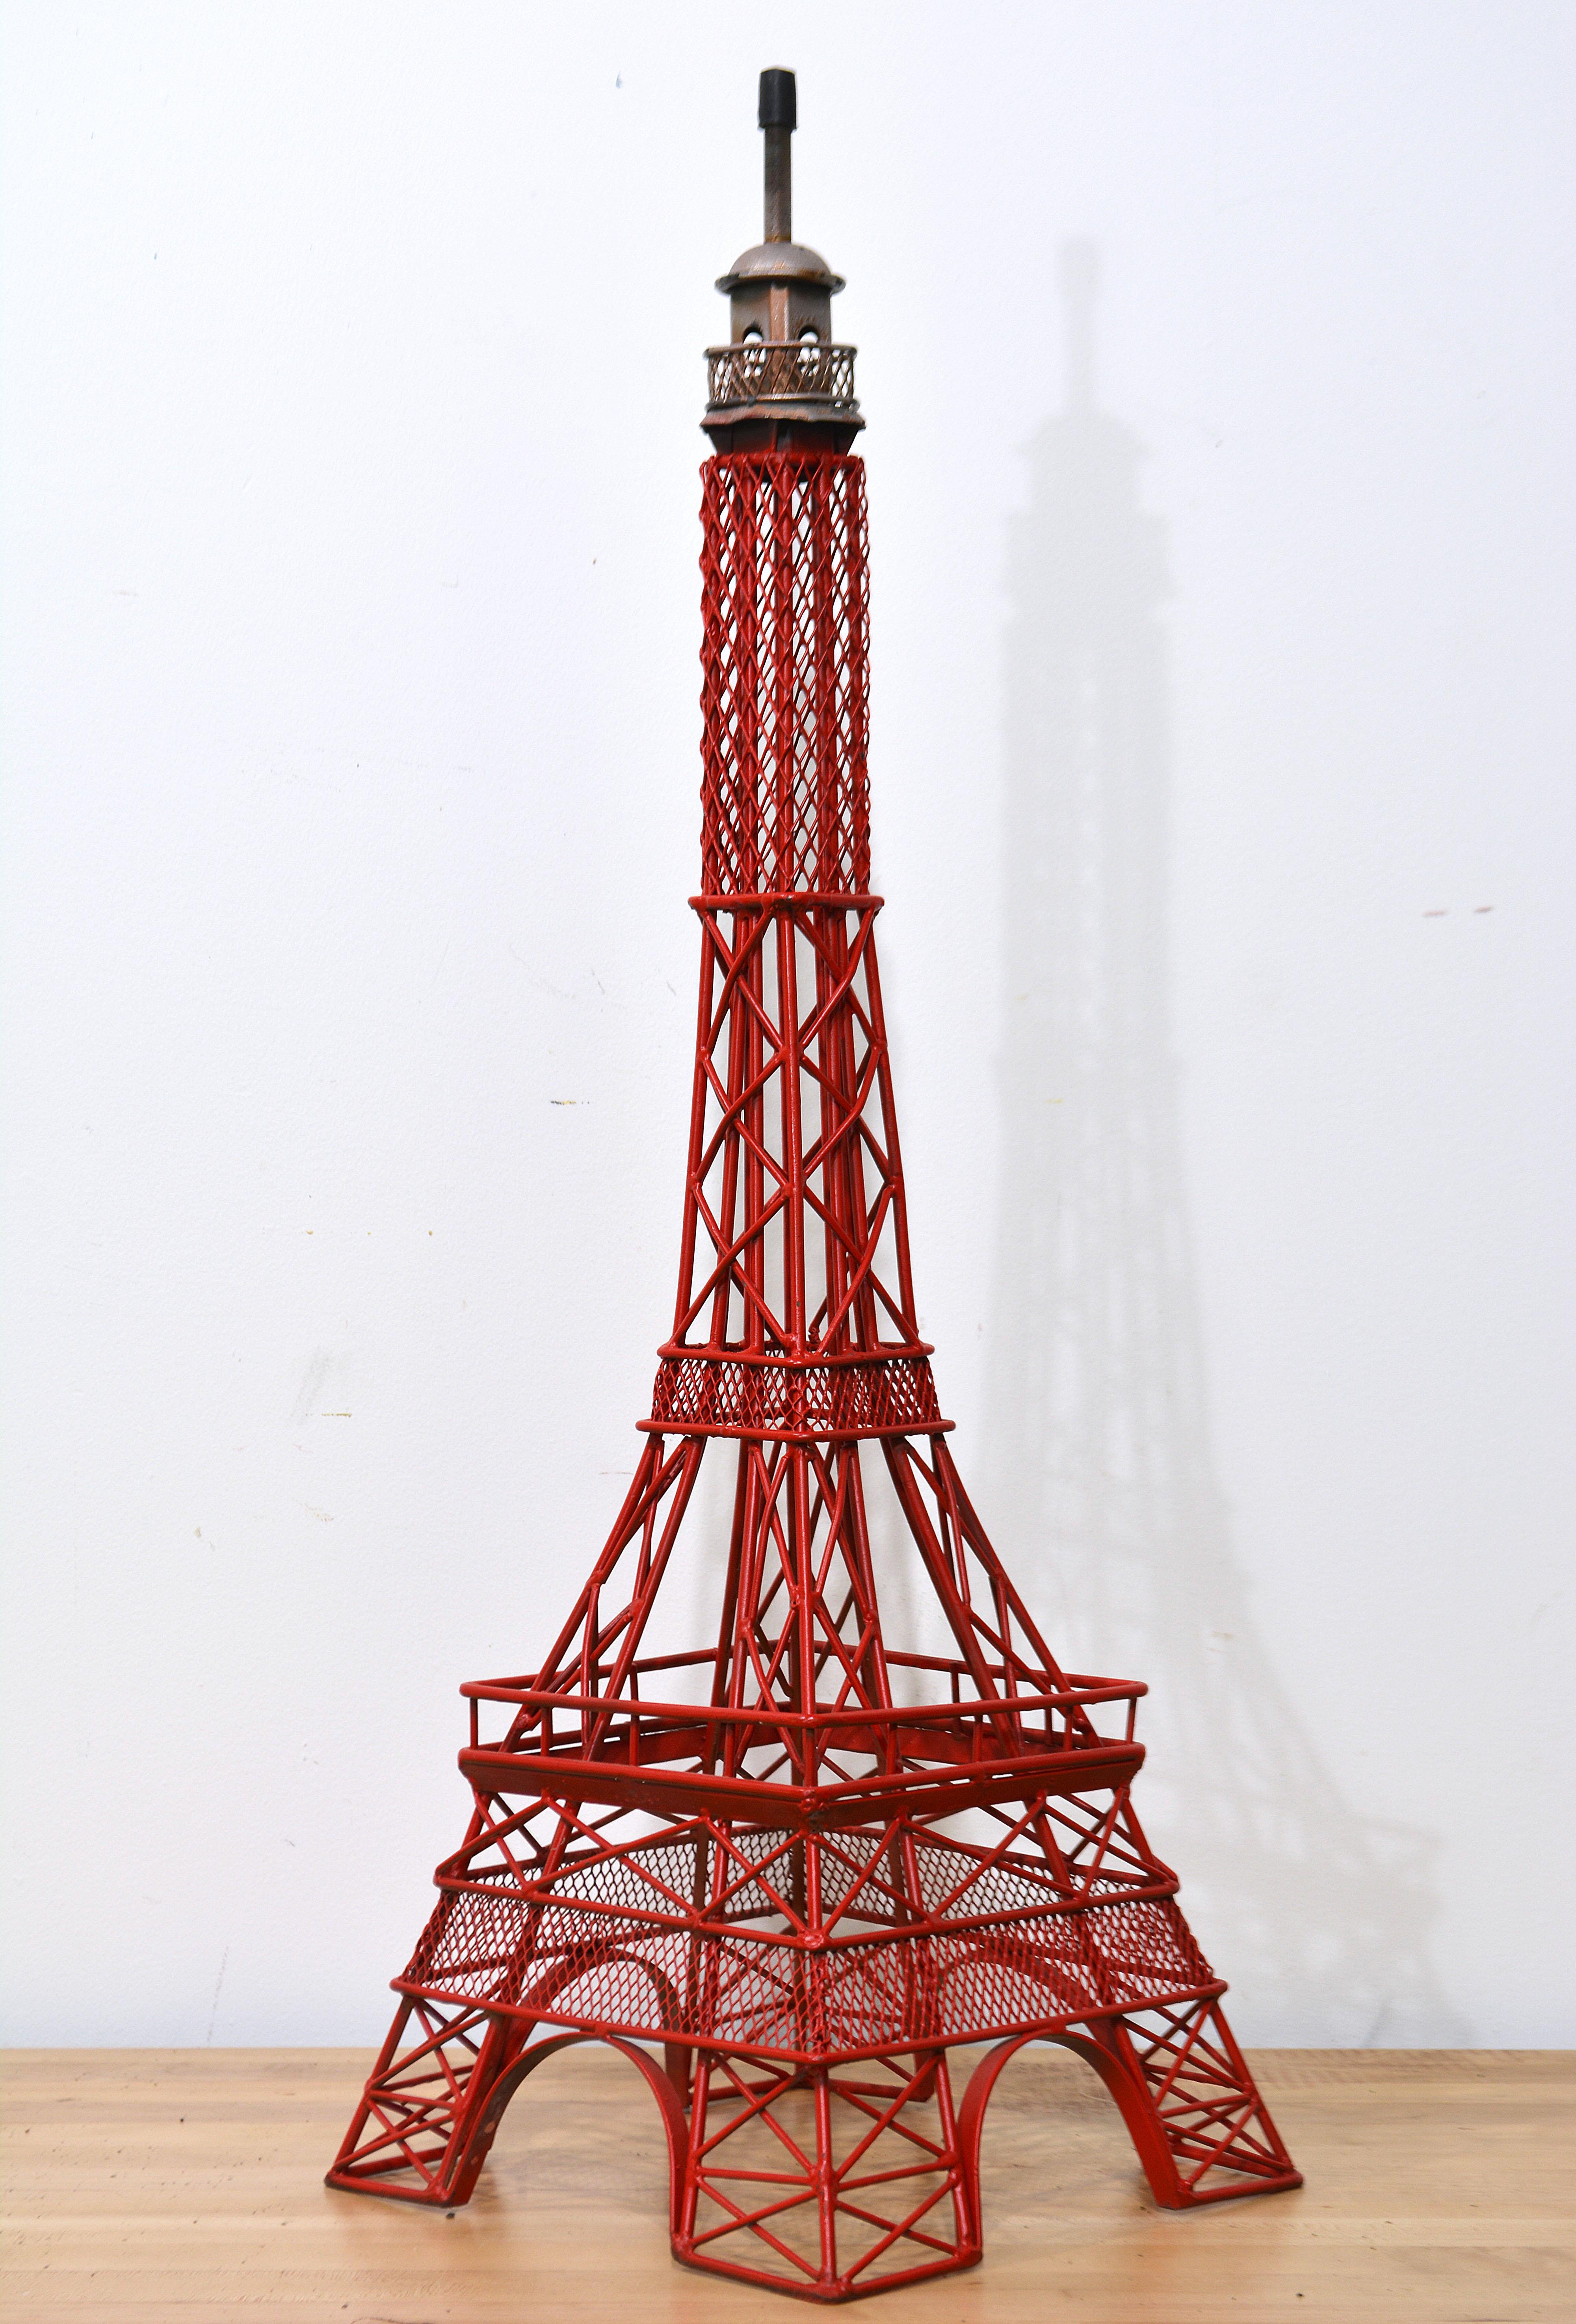 Industrial Tall Painted Decorative Steel Eifel Tower Inspired Lighthouse Sculpture or Model For Sale